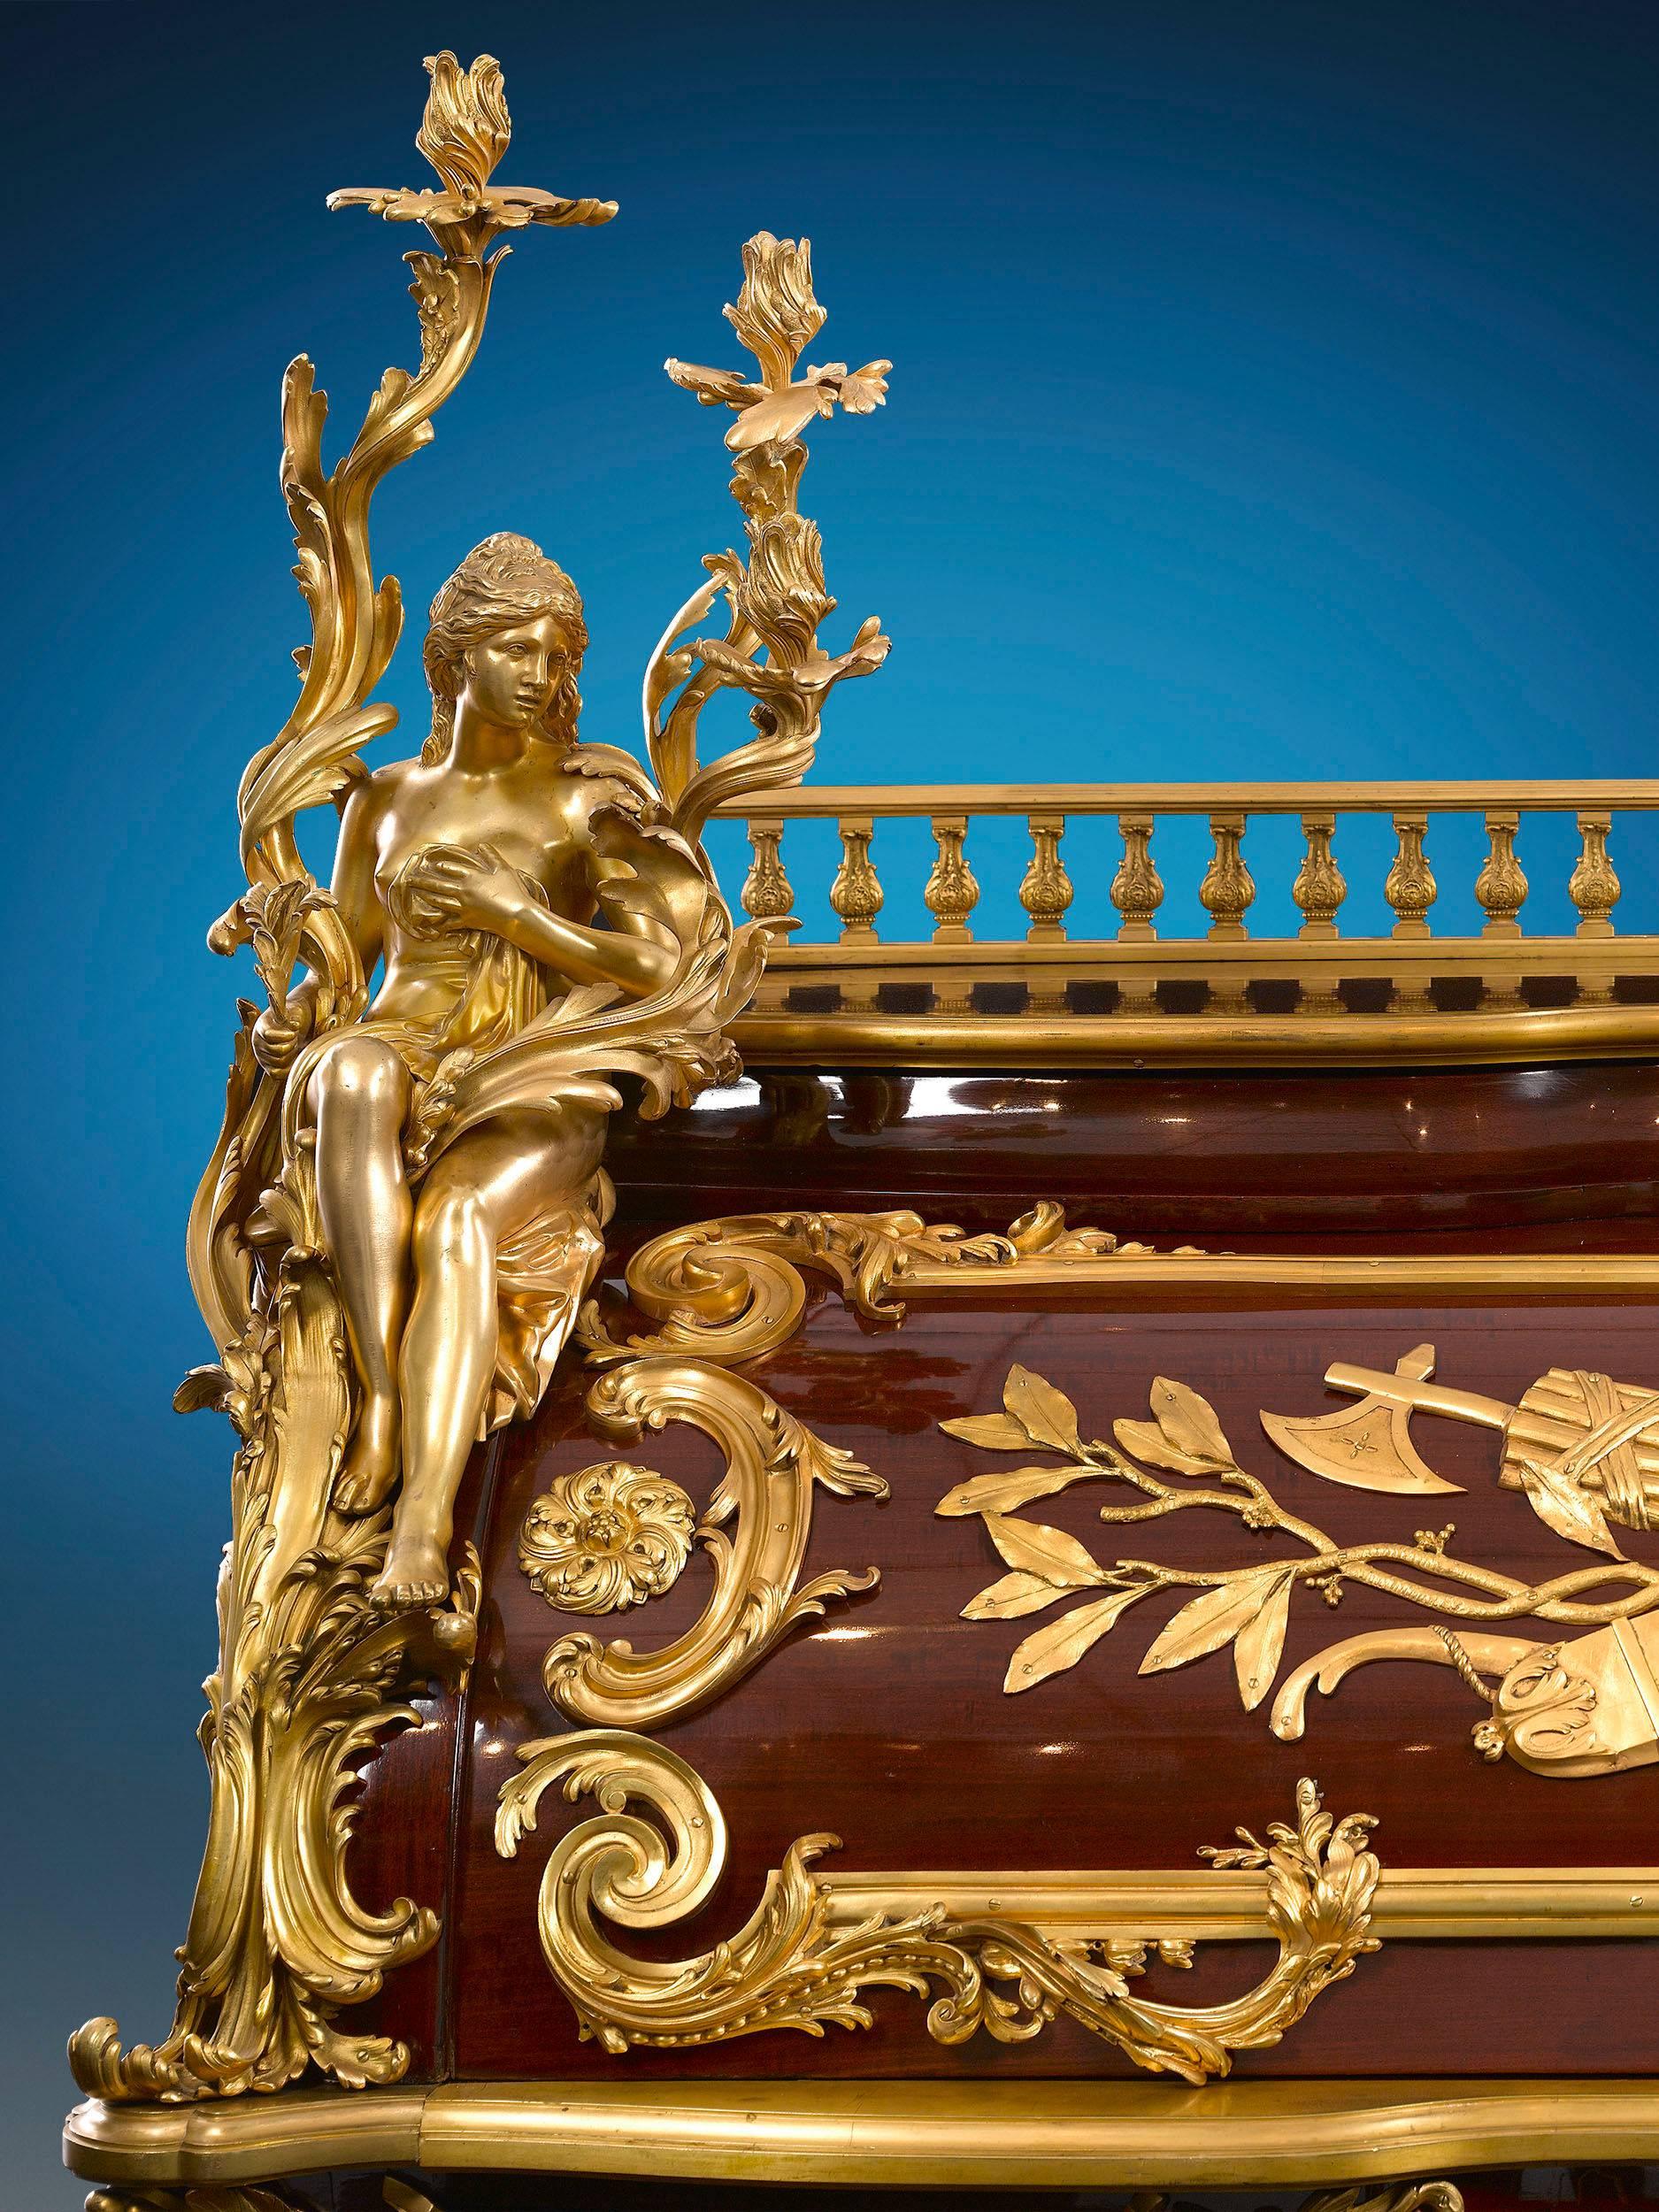 Inspired by the most famed Bureau du Roi (King’s desk) created for King Louis XV, this breathtaking interpretation of the royal secrétaire is one of only four known created by the celebrated ébéniste François Linke. While two are presumed to be